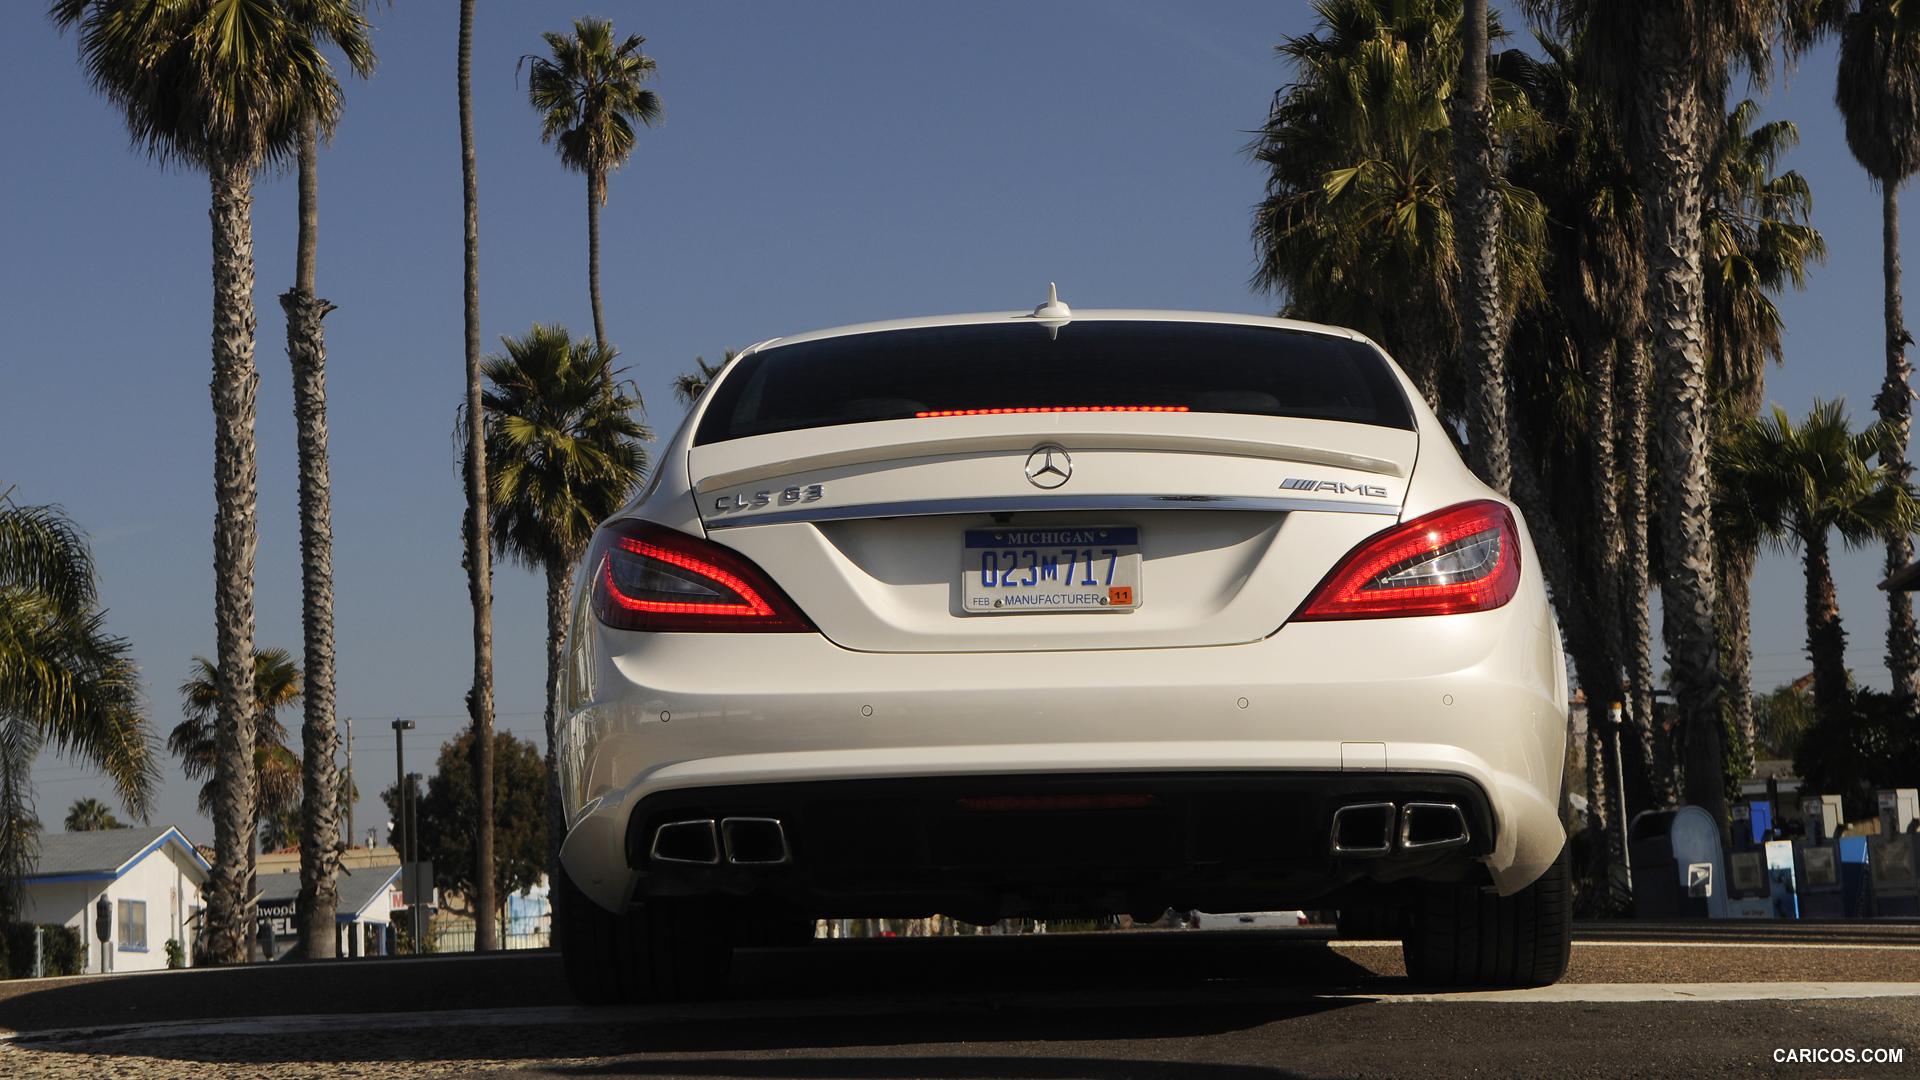 Mercedes-Benz CLS63 AMG (2012) US-Version - Diamond White - Rear , #18 of 100